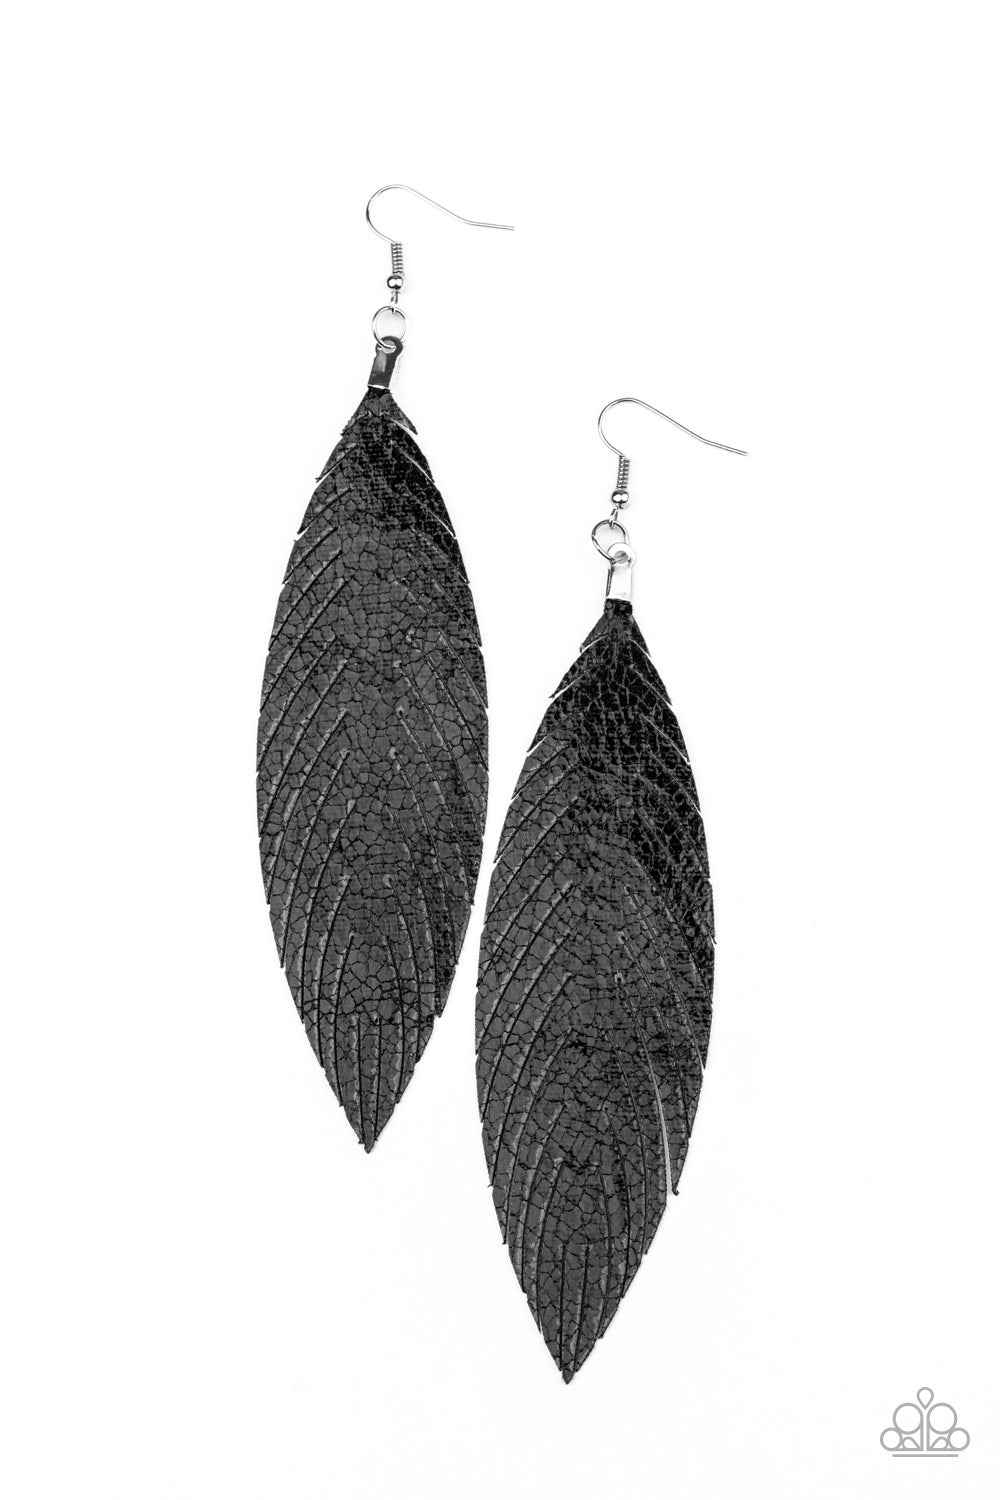 Paparazzi Accessories Feather Fantasy - Black Earrings - Lady T Accessories